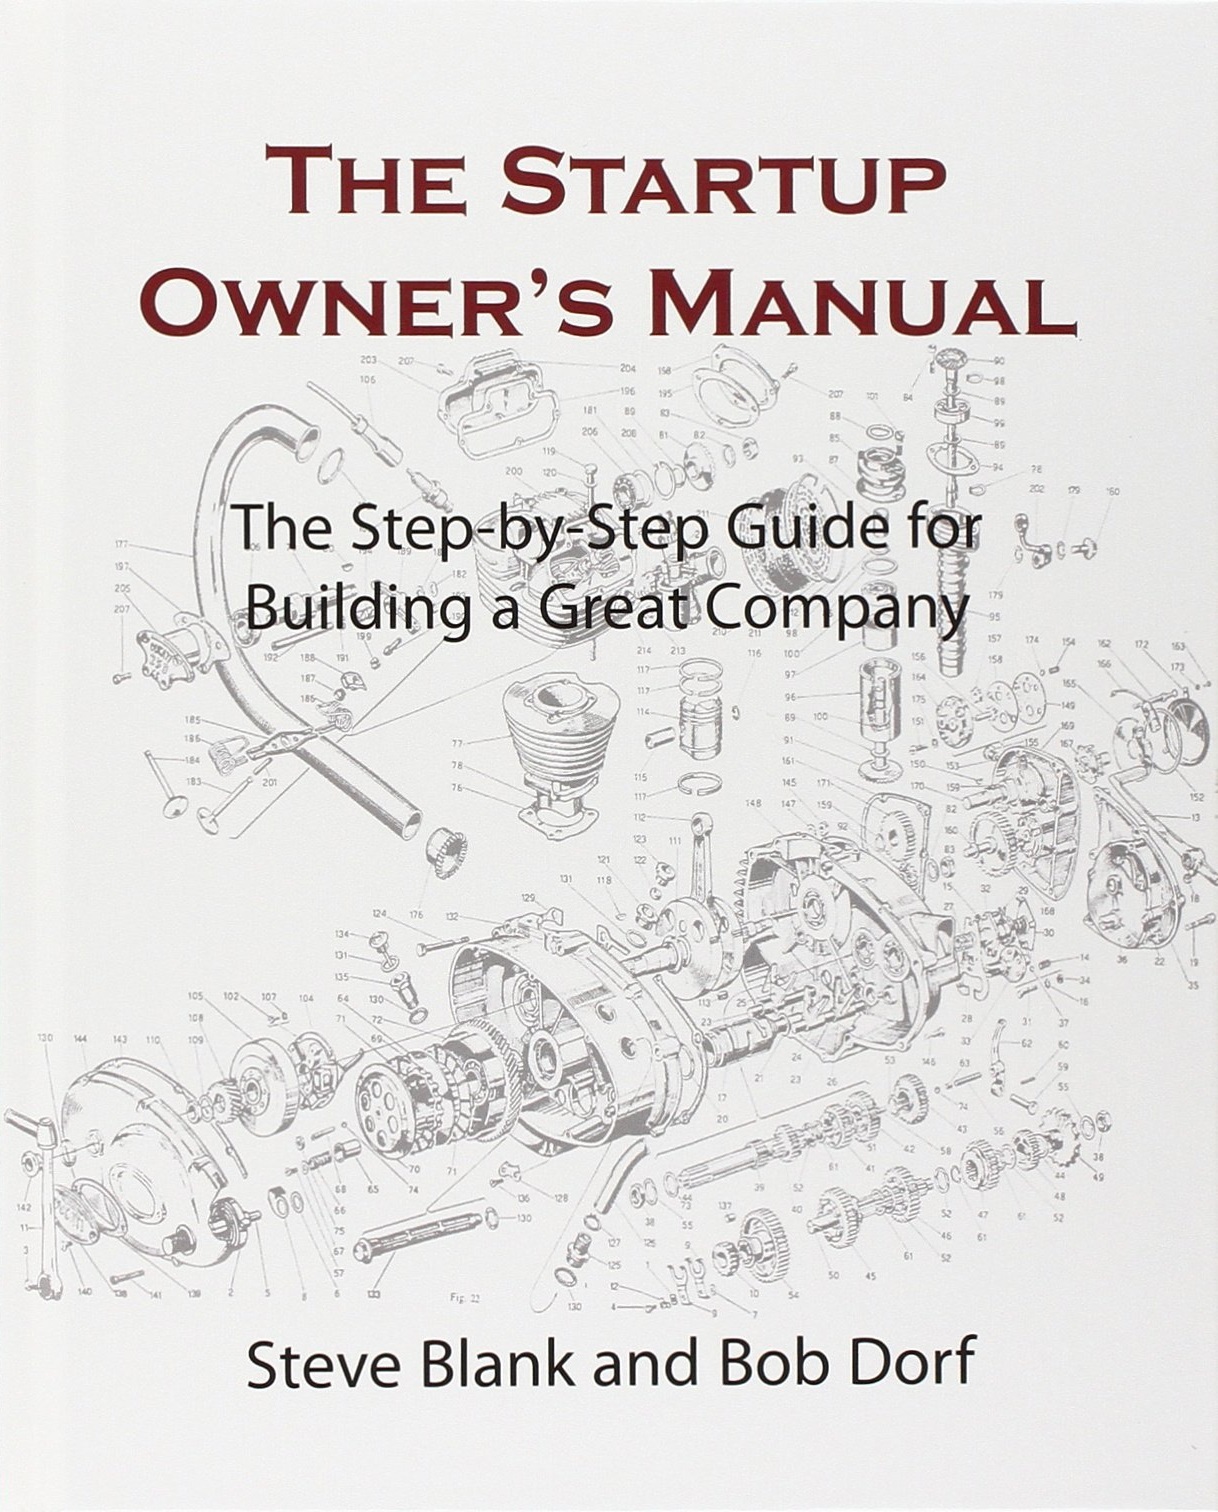 The Startup Owner's Manual by Steve Blank Free Download